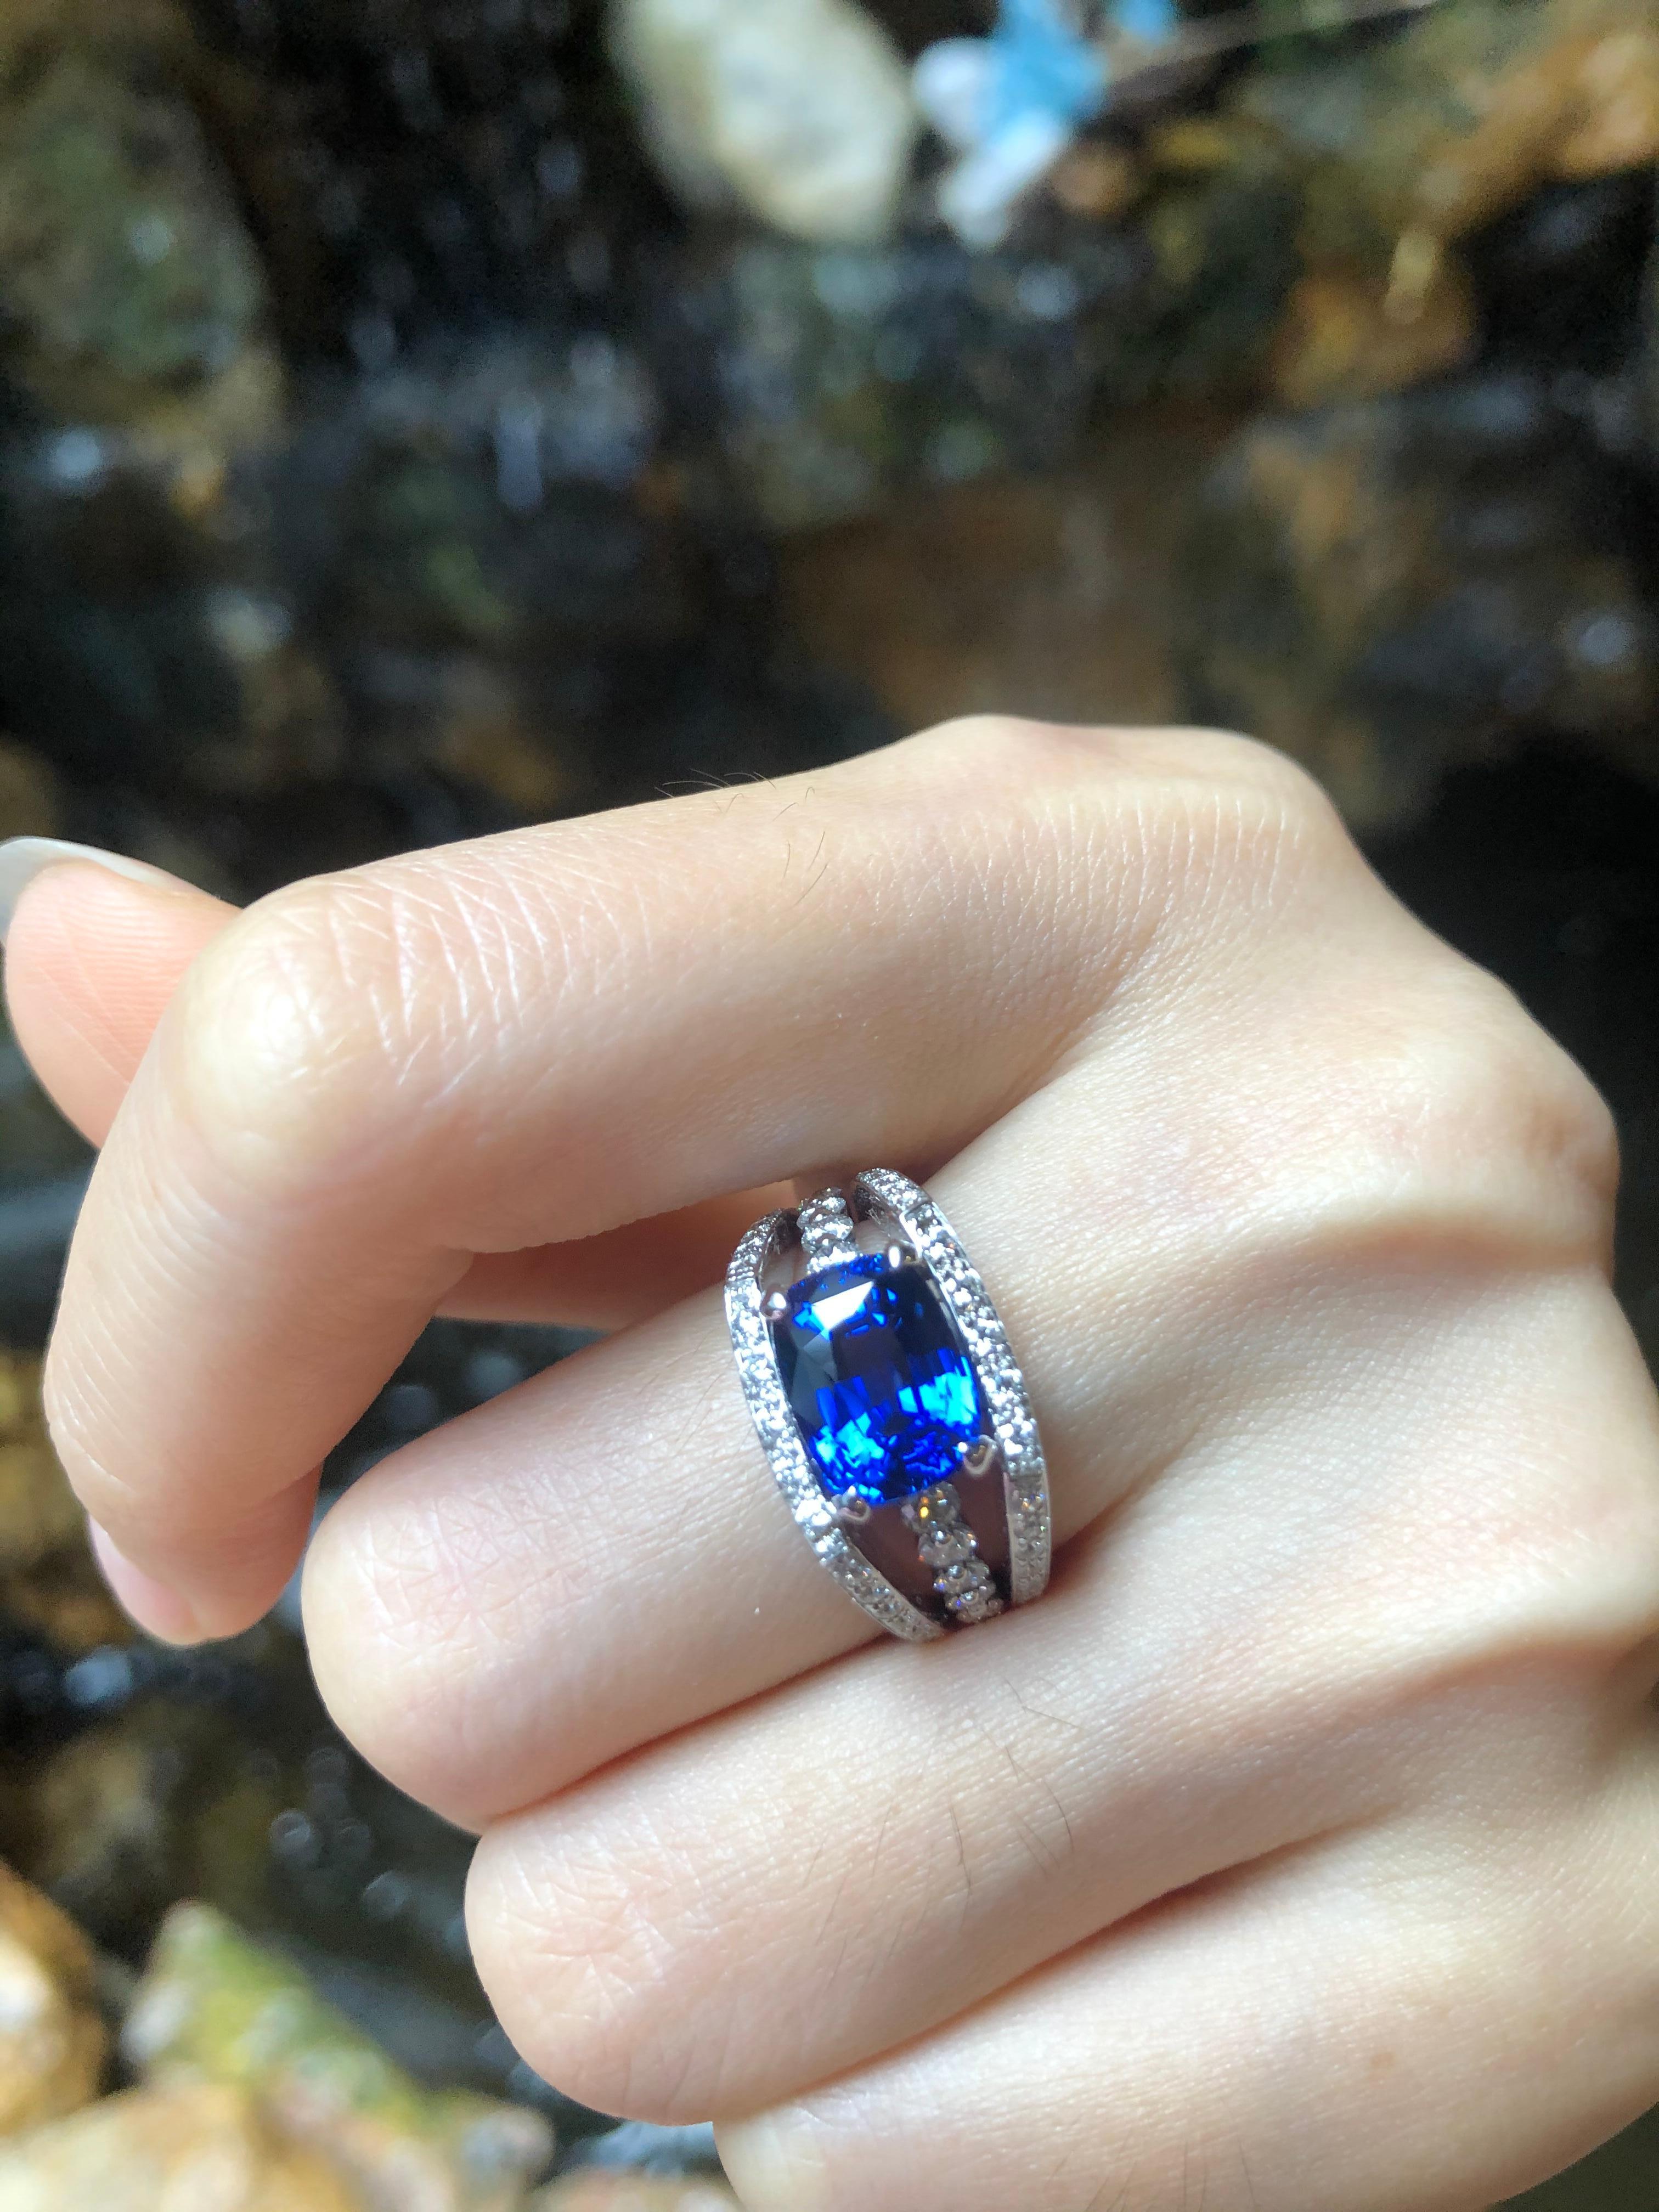 Ceylon Blue Sapphire 4.33 carats with Diamond 1.01 carats Ring set in 18 Karat White Gold Settings
(GIT Certified, The Gem and Jewelry Institute of Thailand)

Width:  1.0 cm 
Length: 1.0 cm
Ring Size: 52
Total Weight: 12.03 grams

